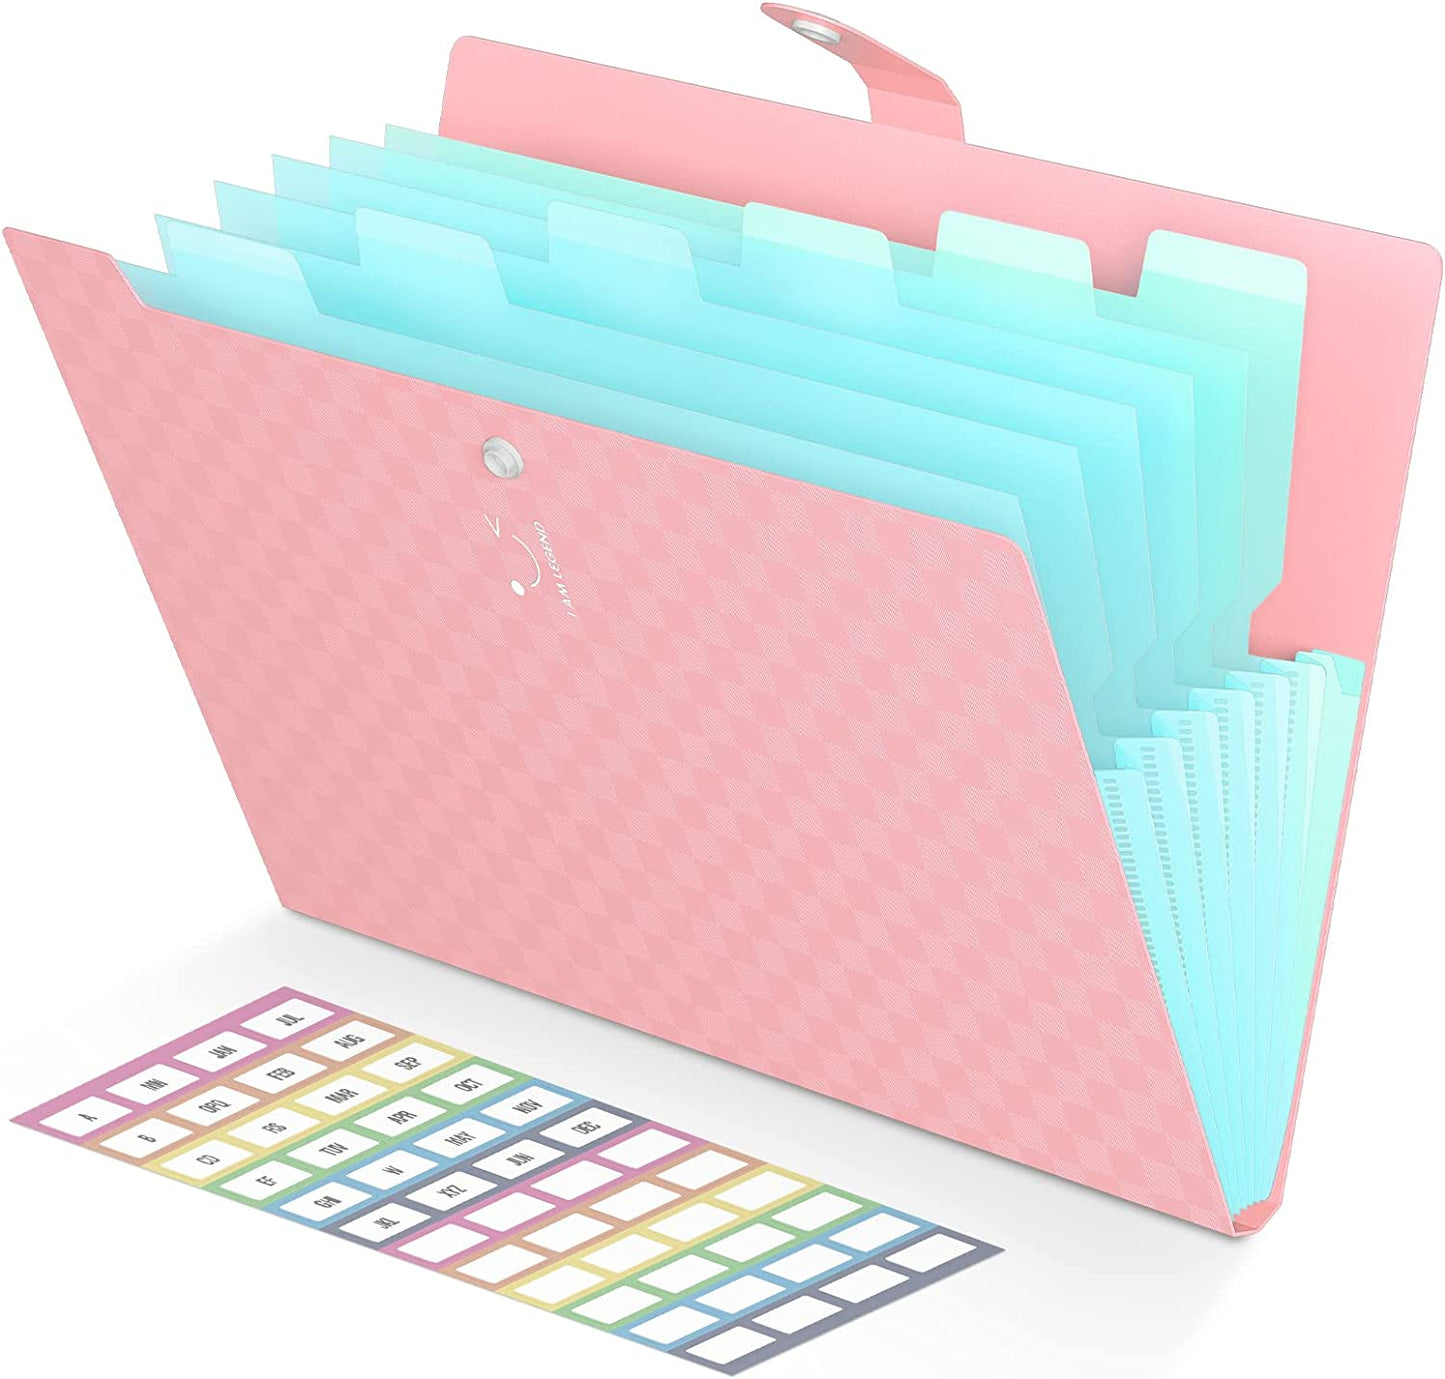 ThinkTex Cute Folder for School with 7 Pockets, Portable File Folders for Documents, Bright Colorful File Organizer, A4/Letter Size - Pink